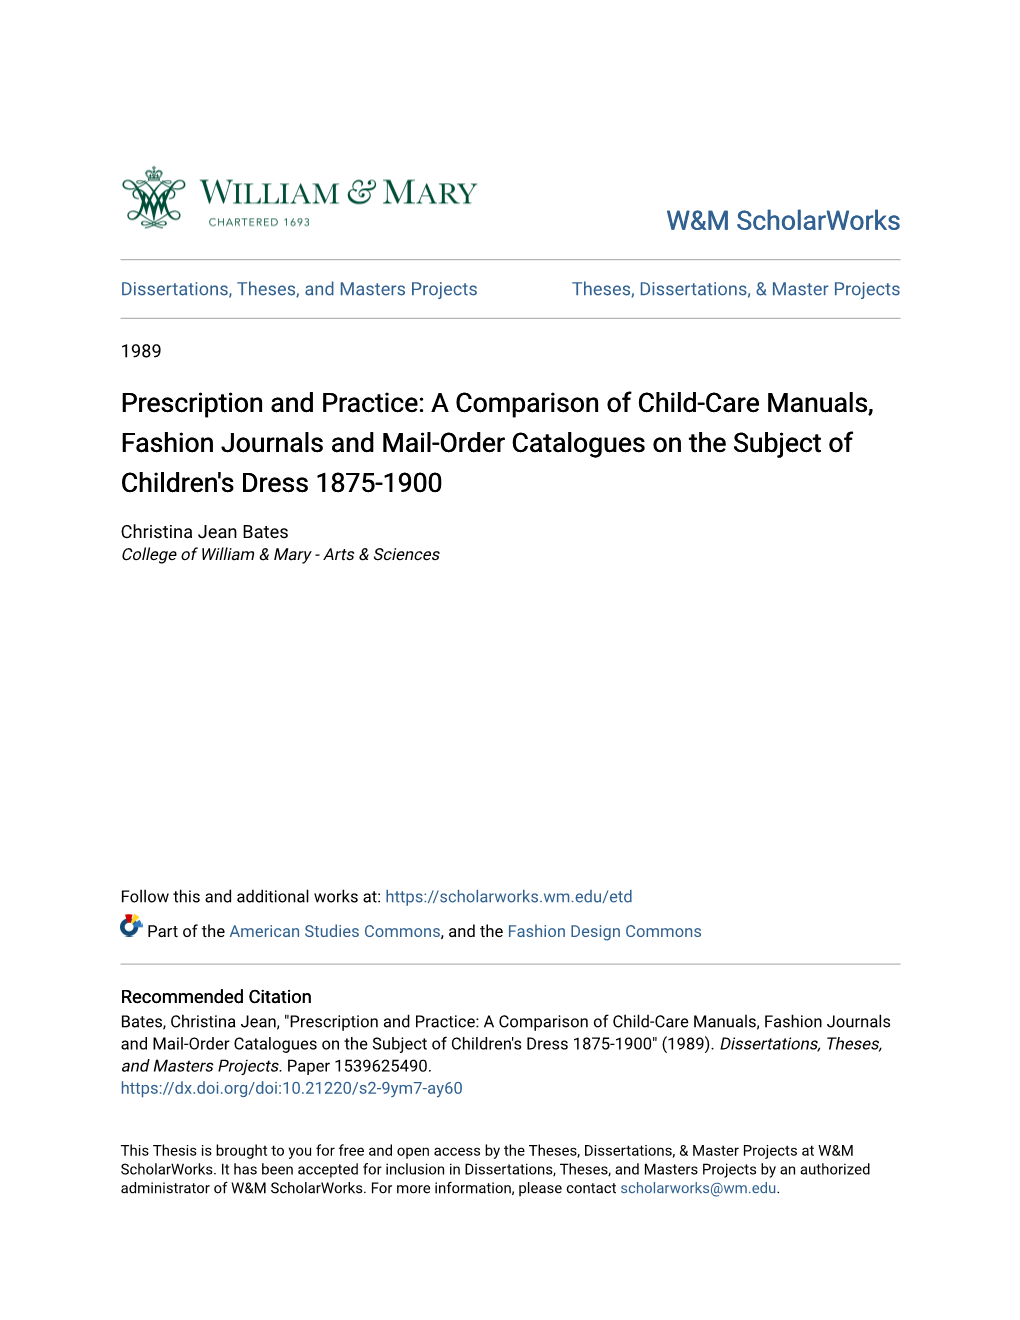 A Comparison of Child-Care Manuals, Fashion Journals and Mail-Order Catalogues on the Subject of Children's Dress 1875-1900